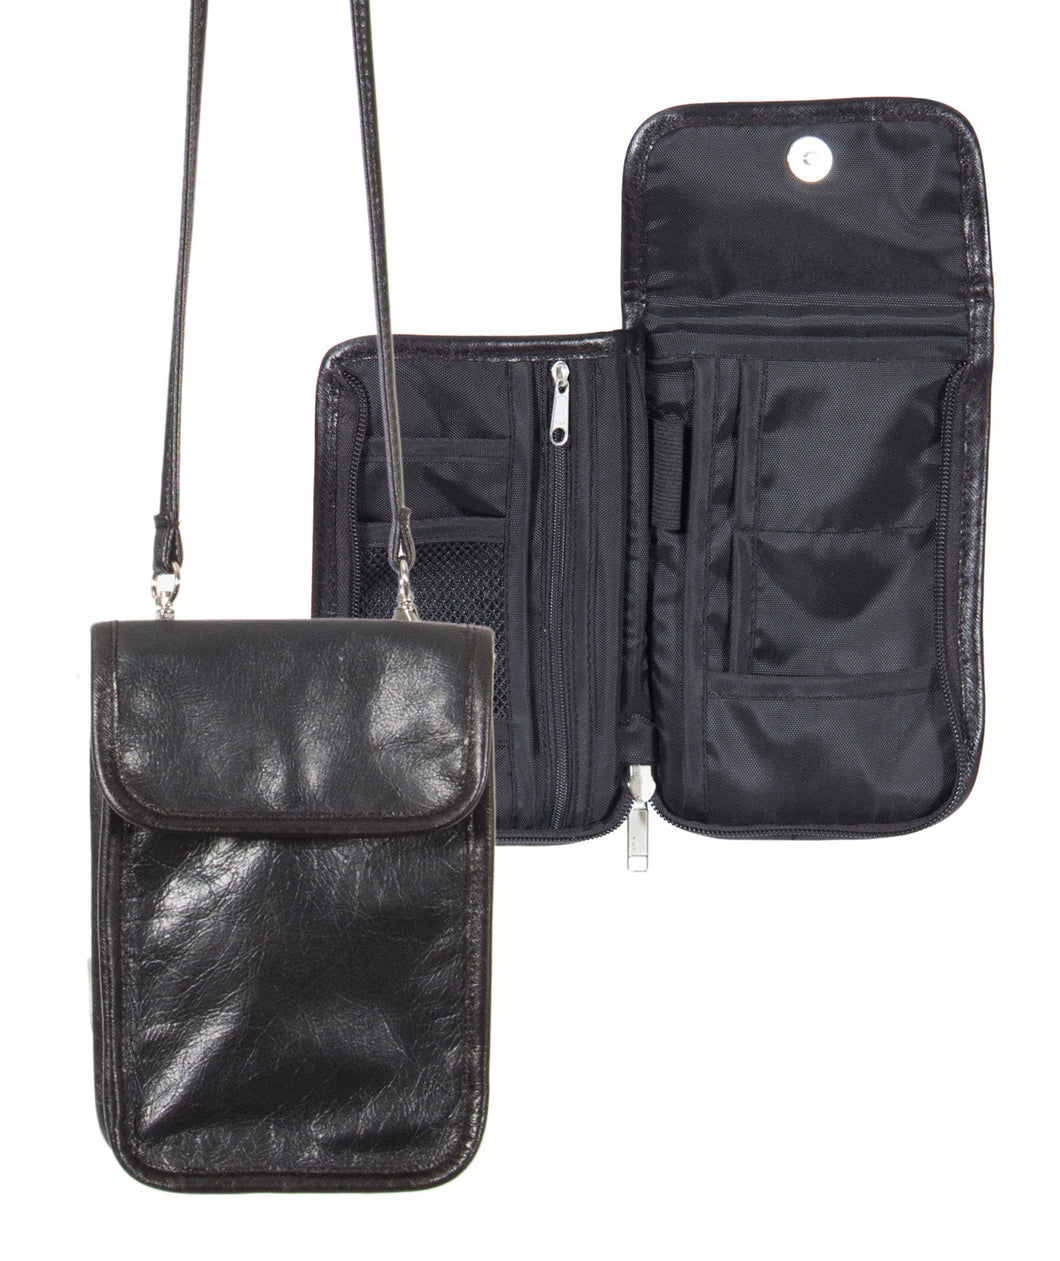 L1036-13 ID Traveller in an Authentic Black Leather. Part of The On the Tee Vintage Golf Collection and Cosmetic and Travel, Vintage Canadiana, and Totes Collections 5.5